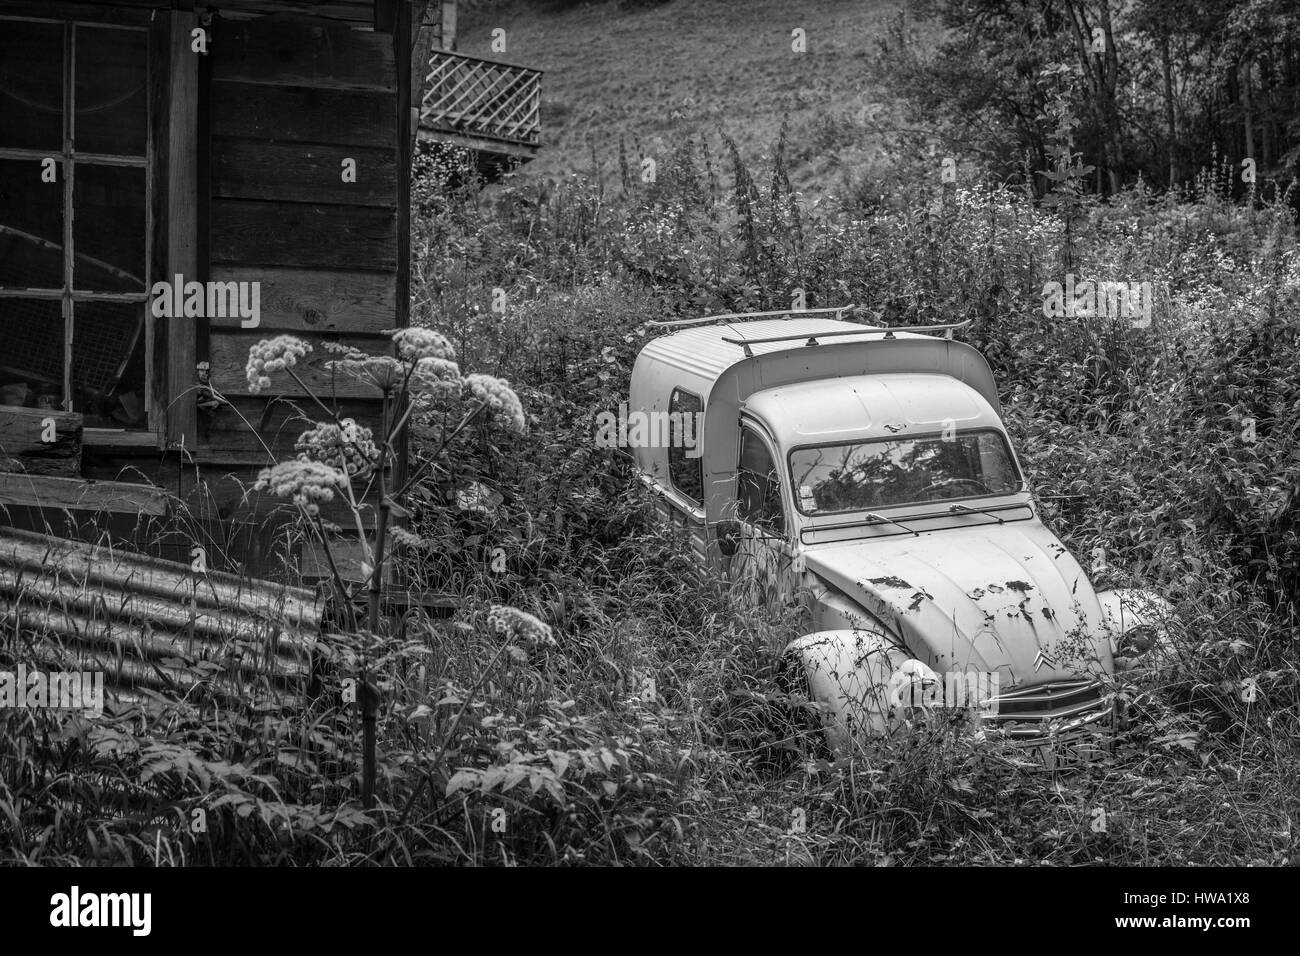 Vintage car in an overgrown yard Stock Photo